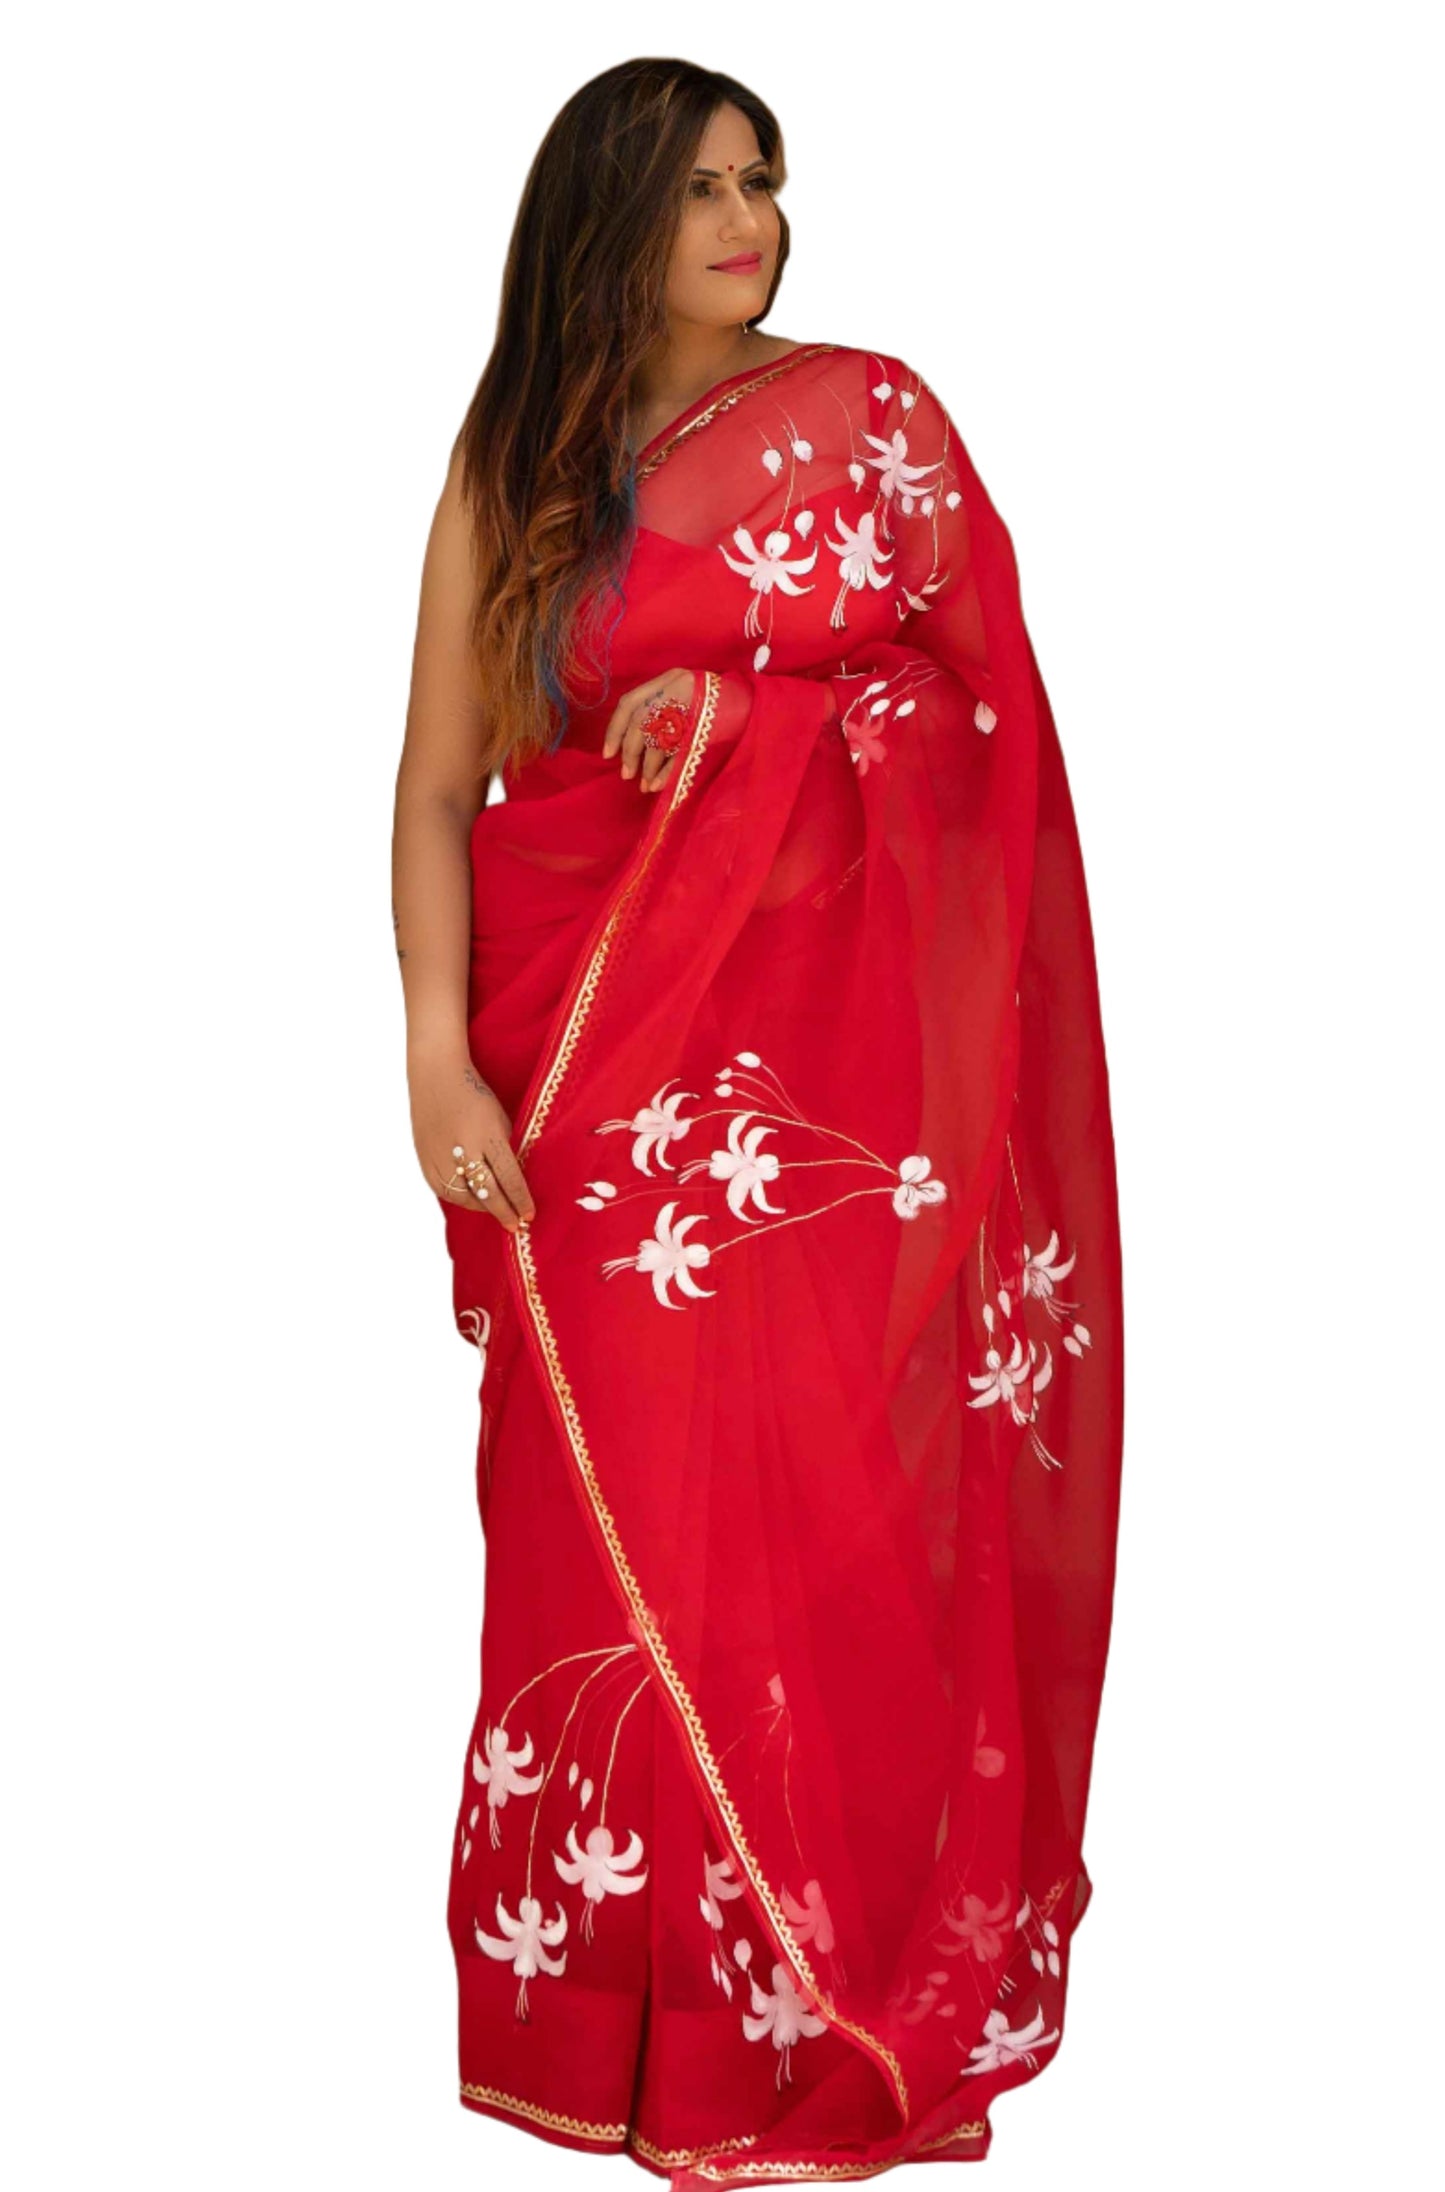 Hand-Painted Red Pure Silk Organza Saree with White Fuchsia Flowers and Metal Gota Embroidery - Perfect for Indian Weddings and Parties. Shop this Stunning Organza Saree Online for a Hot Saree Style. This Pure Silk Saree Features Exquisite Cloth Painting and Textile Paint for Fabric, Making it a Unique Hand-Painted Saree. Get the Saree Look You Desire with this Simple Saree Design. Explore Our Saree Shop for More Sadi Ka Design and Saree Options.